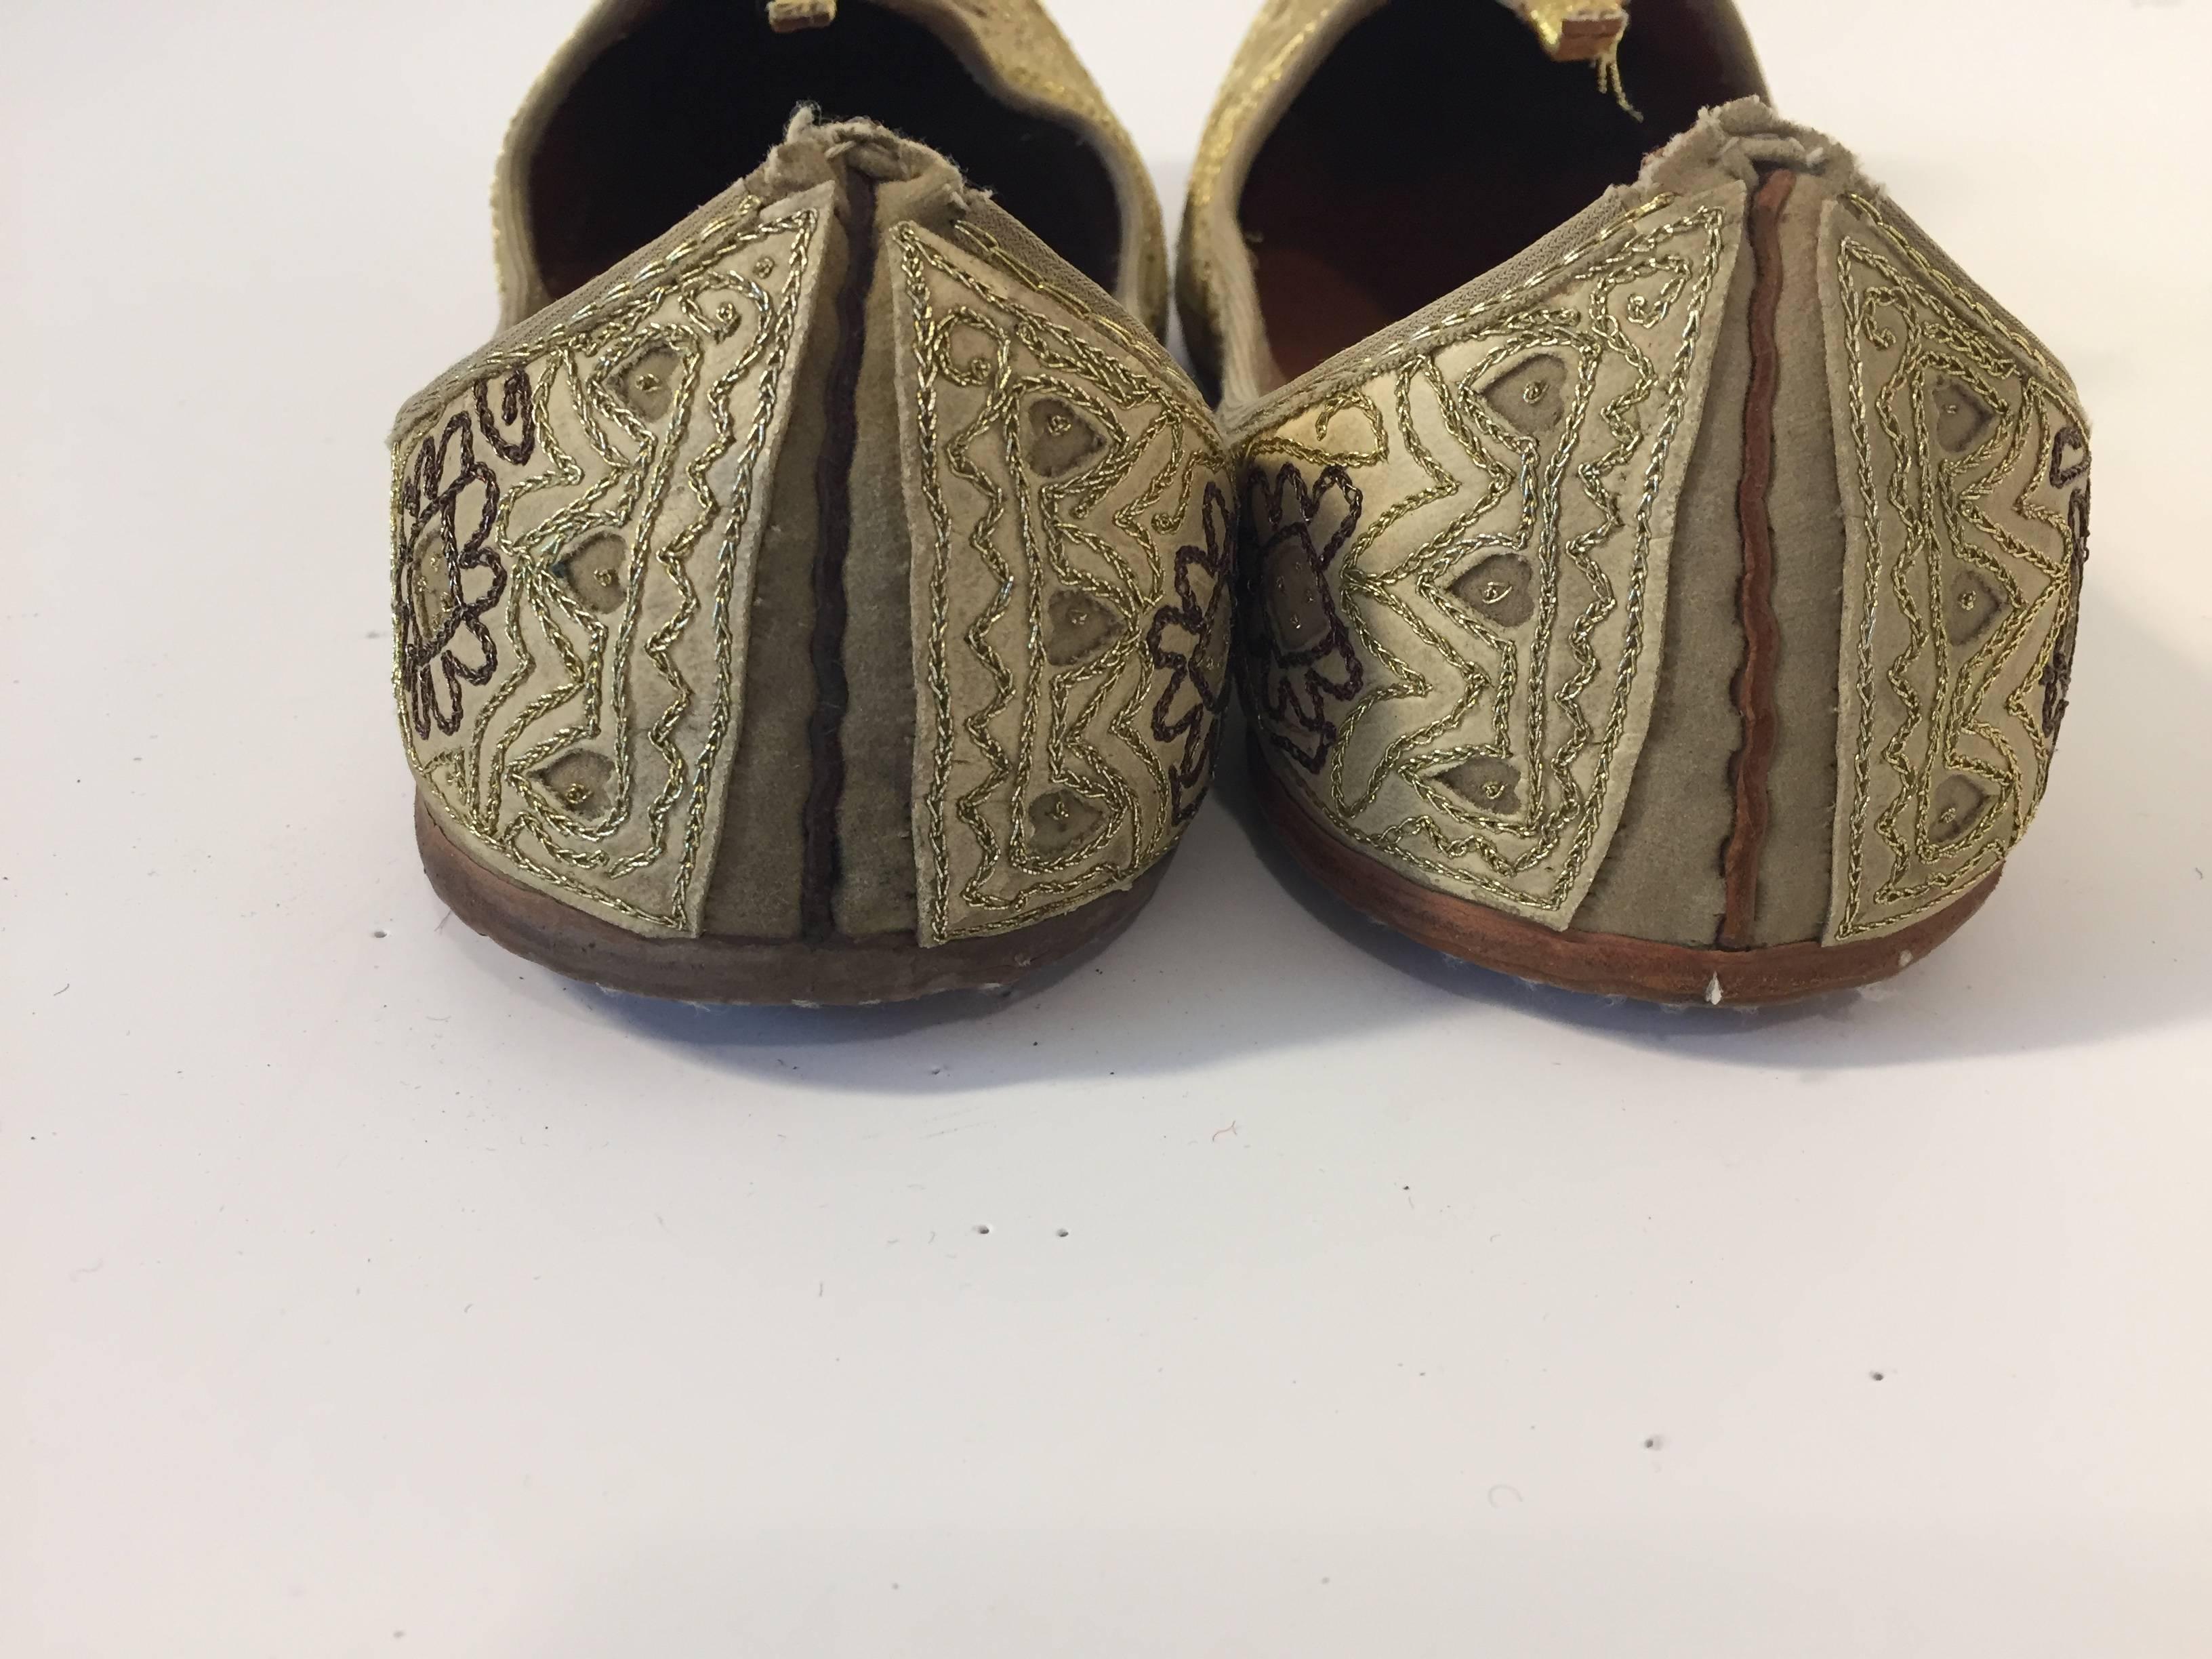 Agra Handcrafted Moorish Arabian Embroidered Slippers Shoes